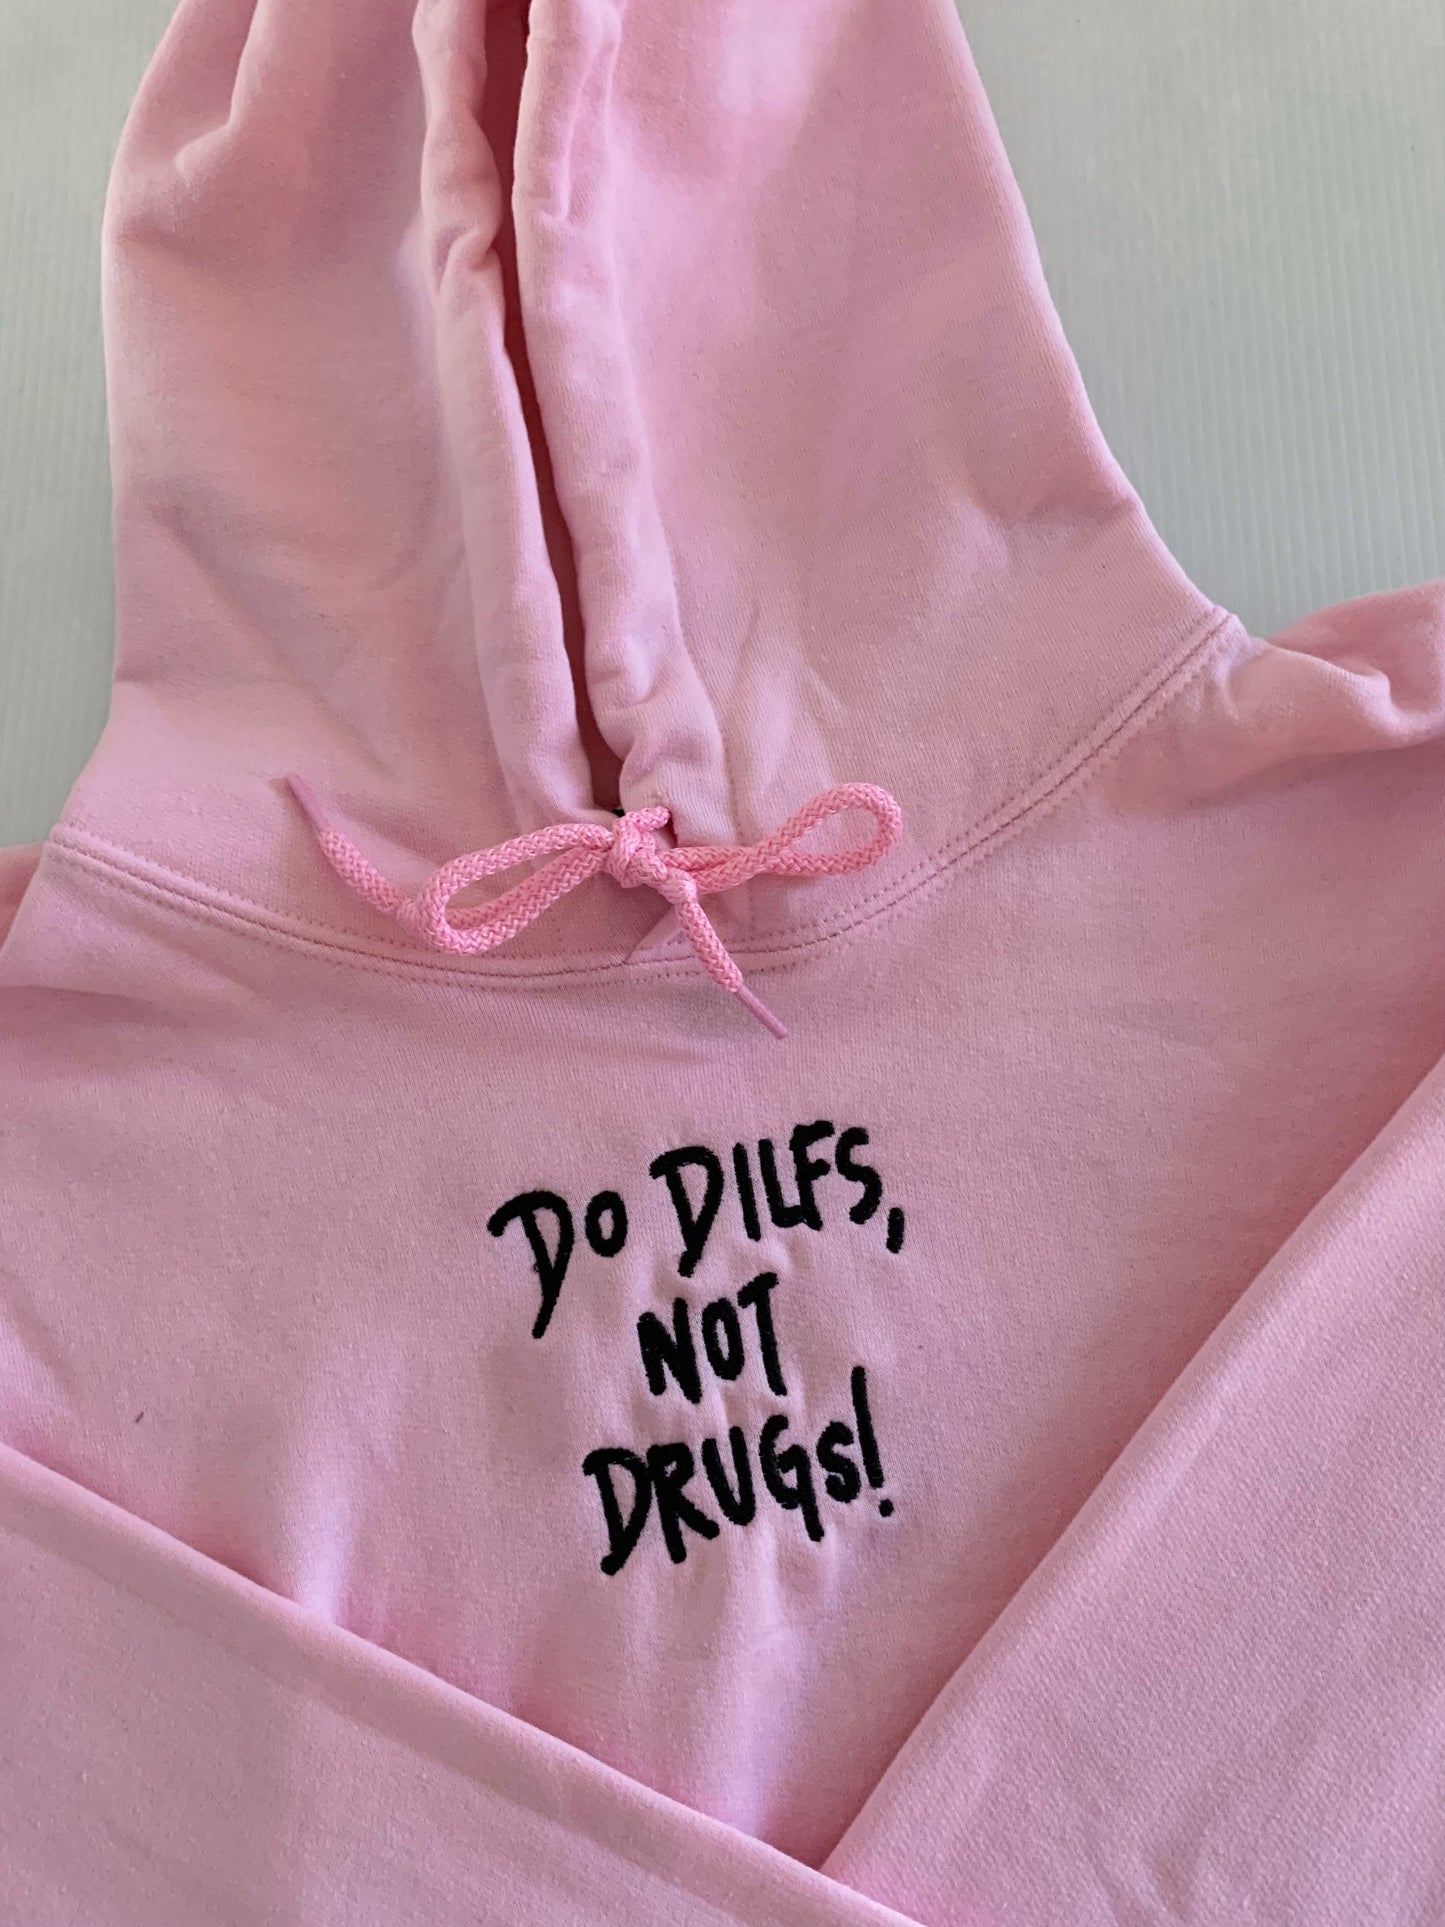 Do Dilfs Not Drugs Embroidery